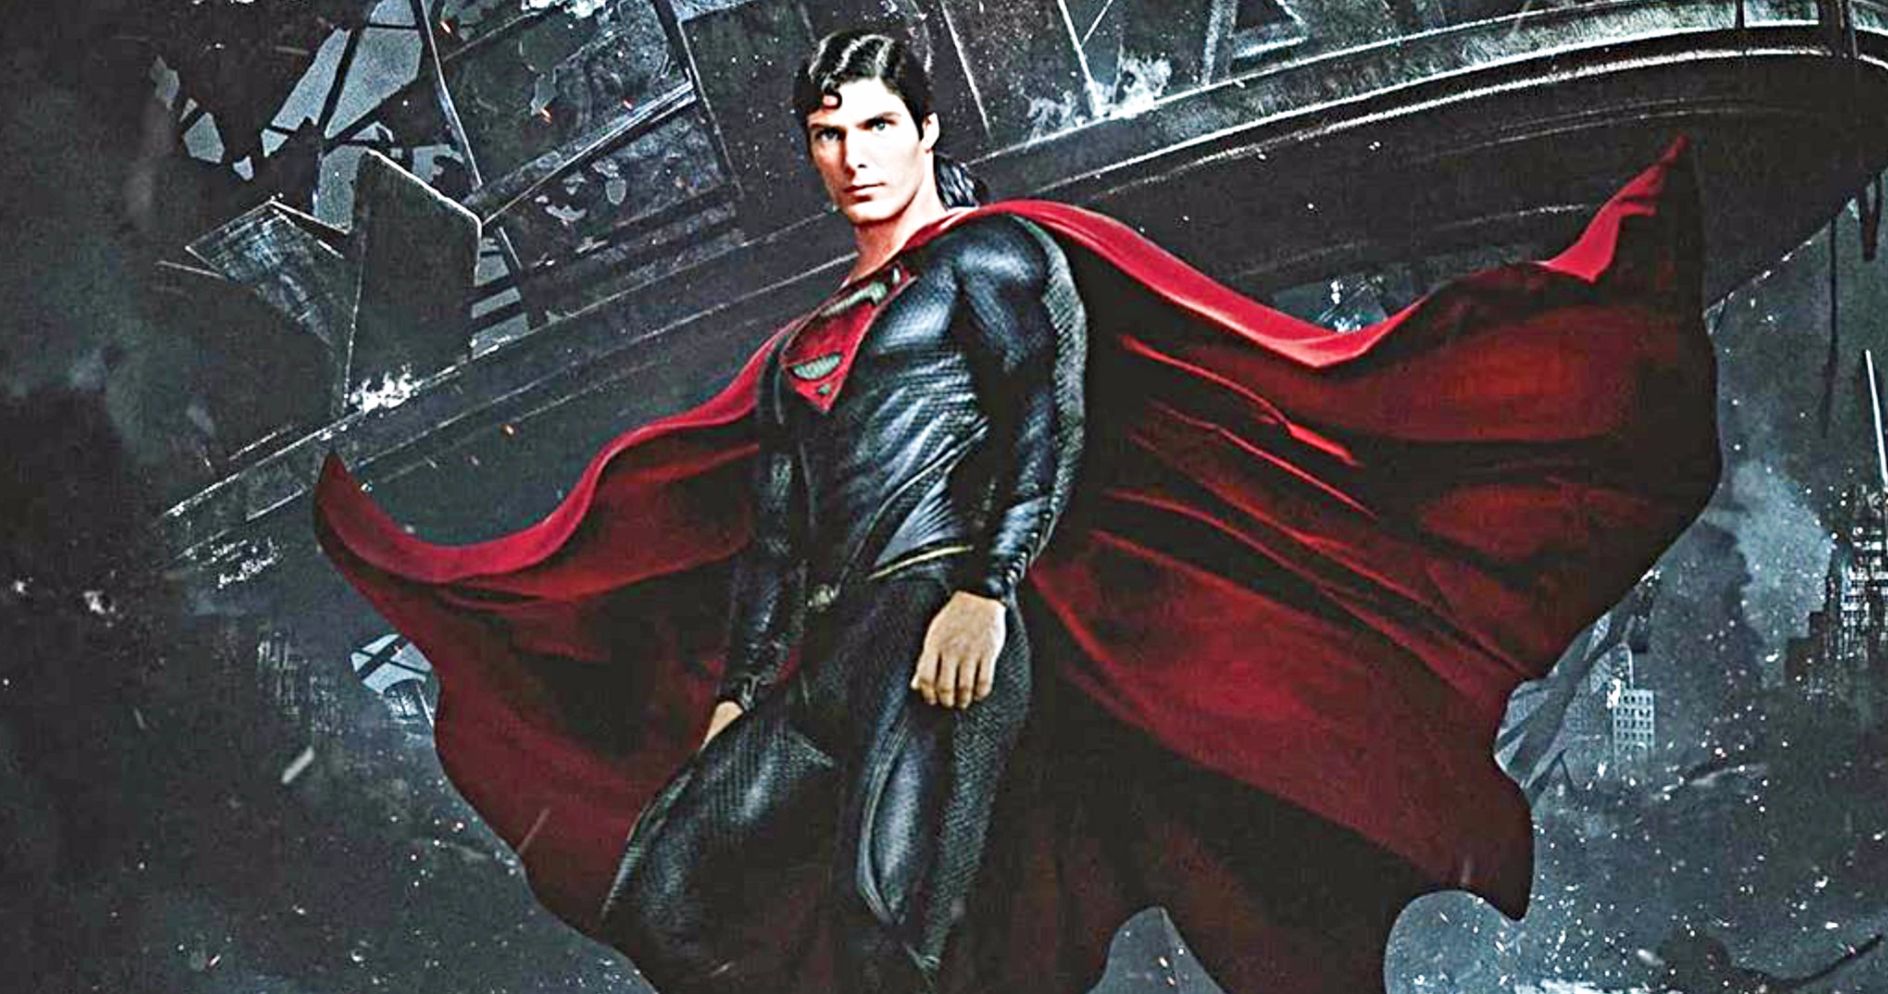 Christopher Reeve Is the Man of Steel in Fan Art Featuring Henry Cavill's Superman Suit